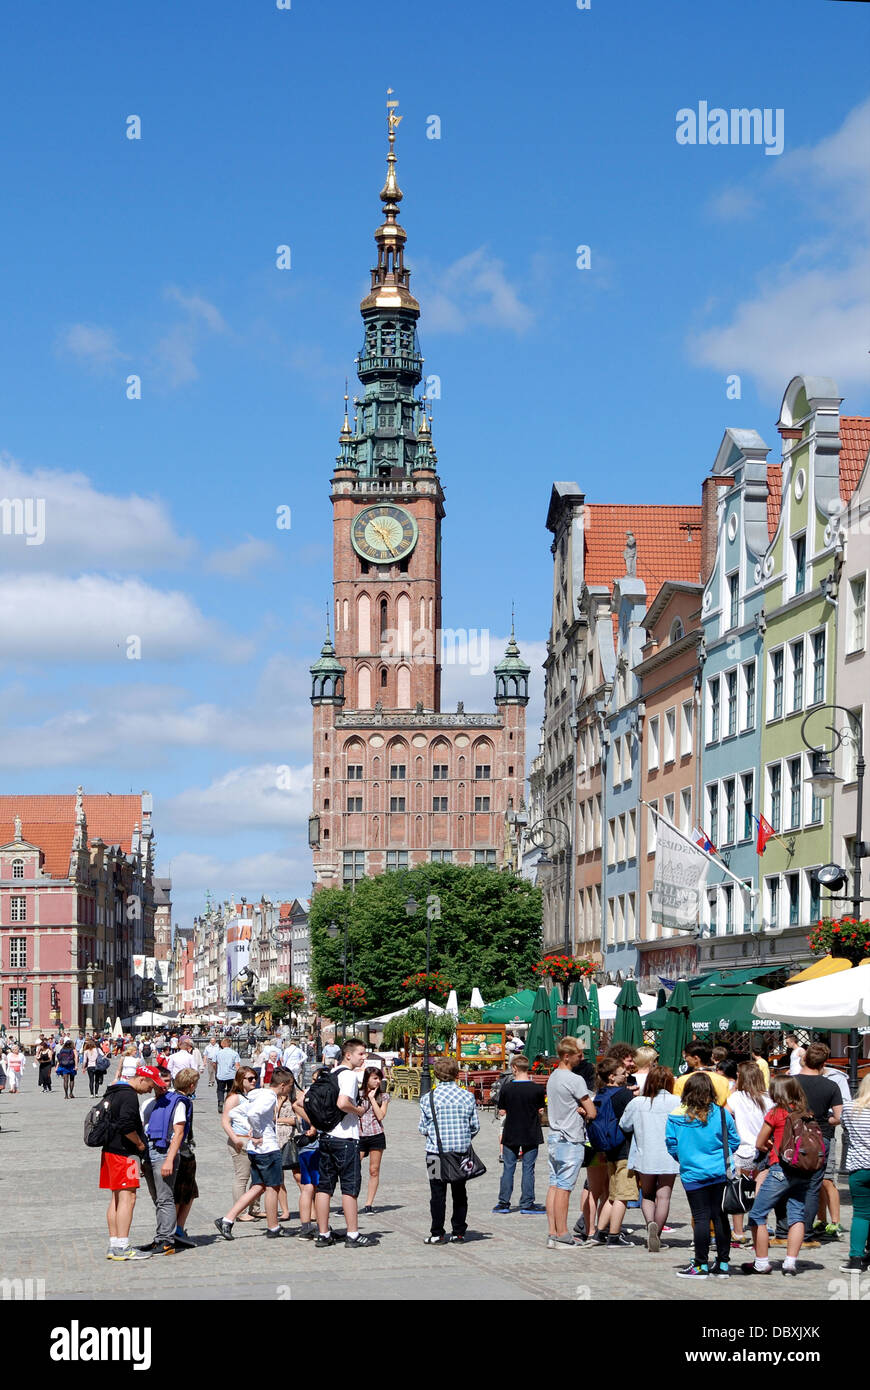 Historic Old Town of Gdansk with the Town hall on Long Market. Stock Photo